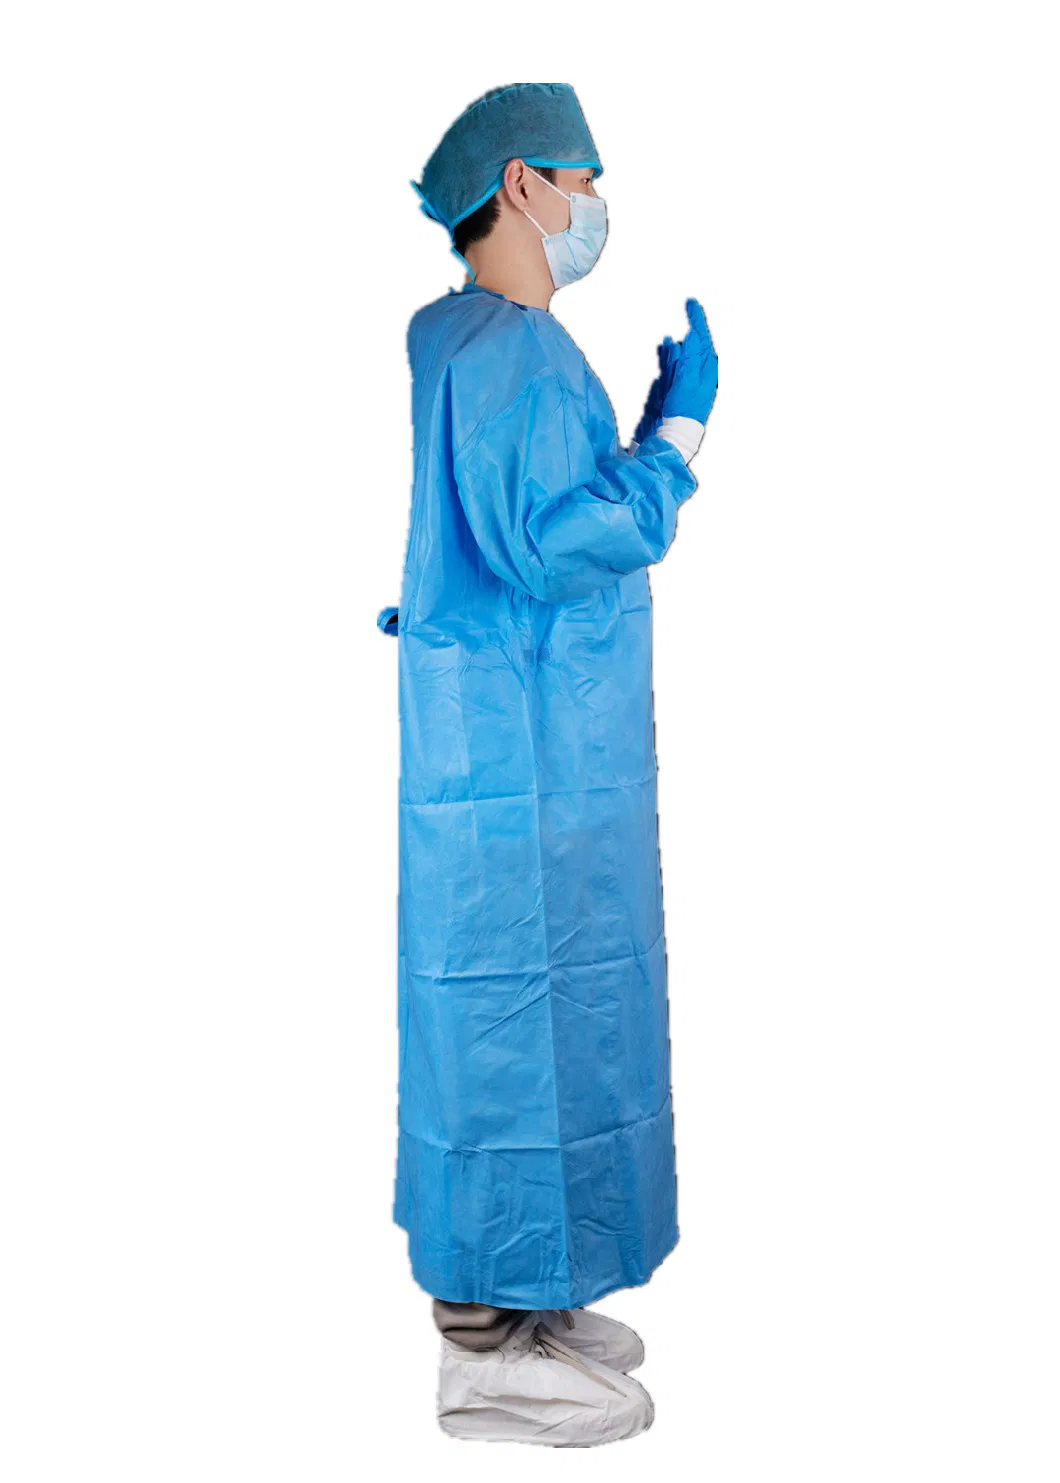 Doctor Use Disposable SMS Surgical Gown with Reinforced Material for Prevent Virus and Fluid